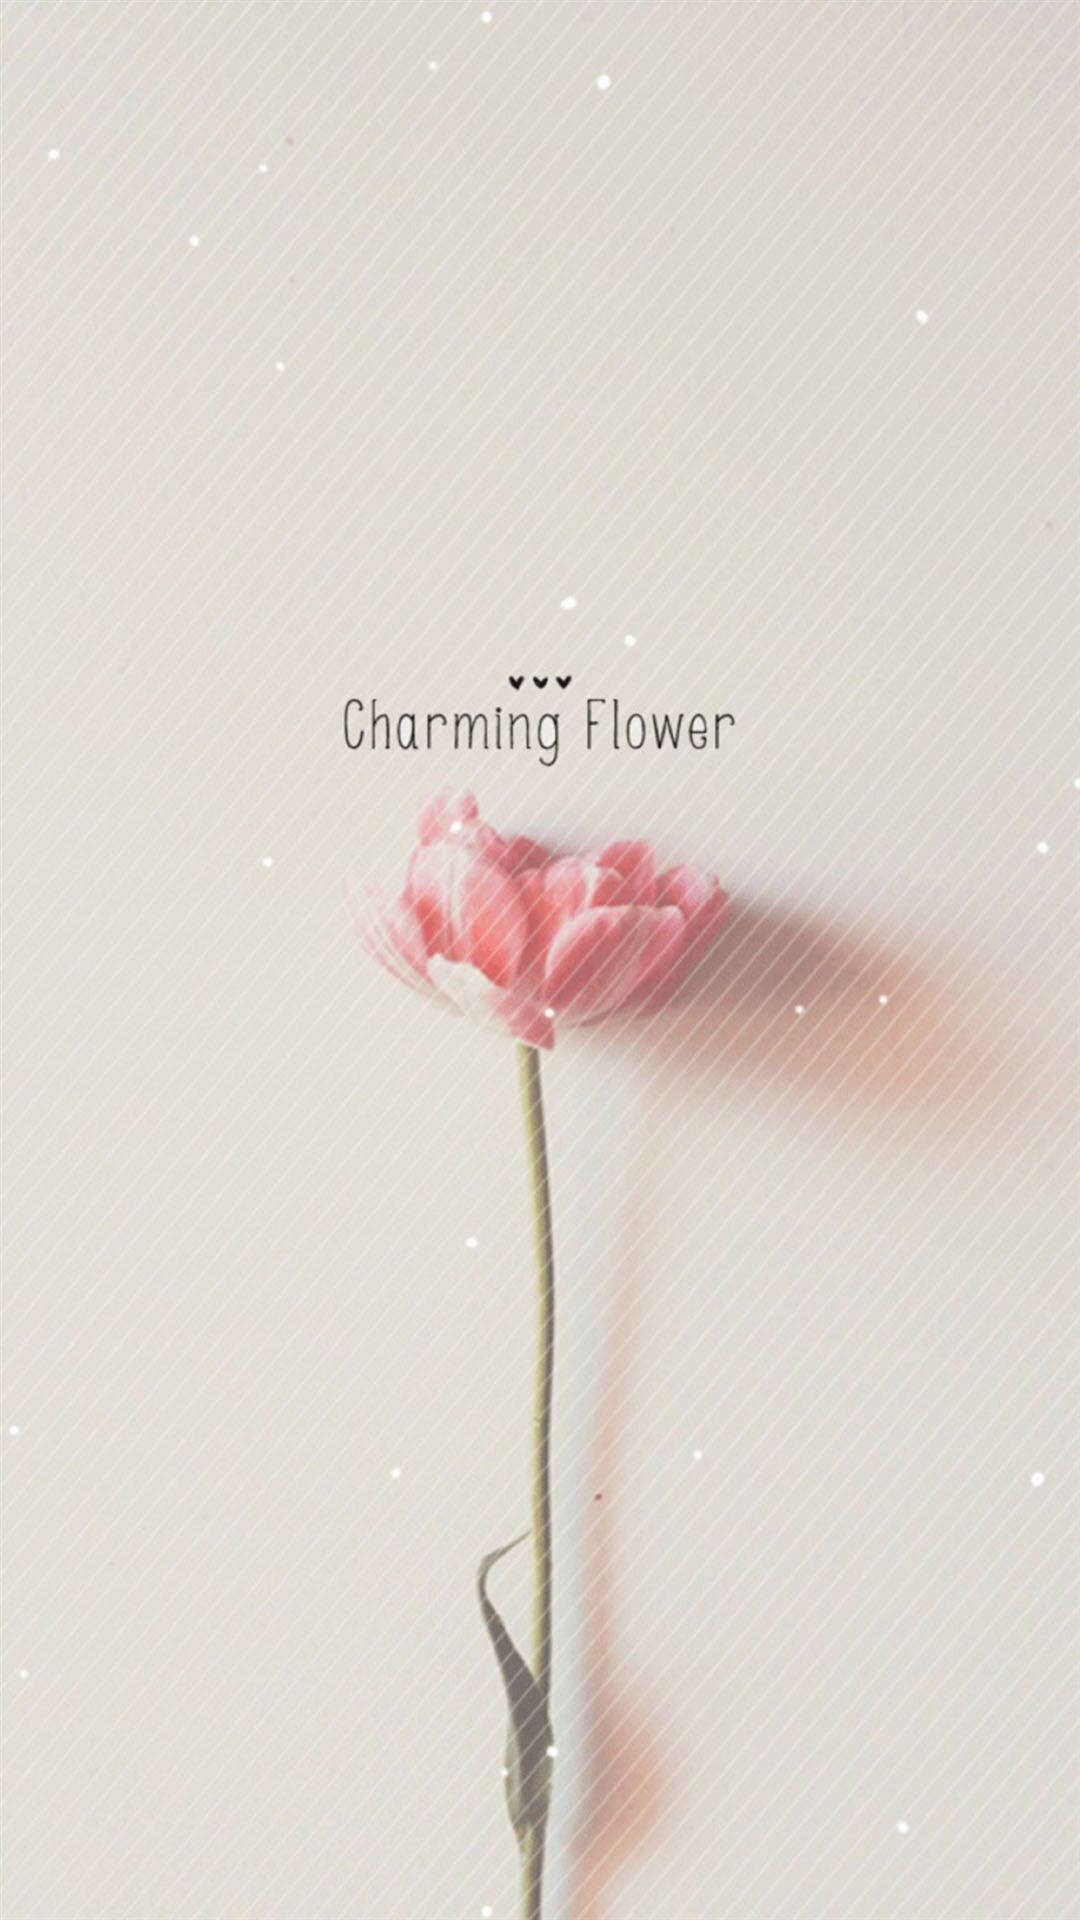 Charming Flower Simple Iphone Wallpaper